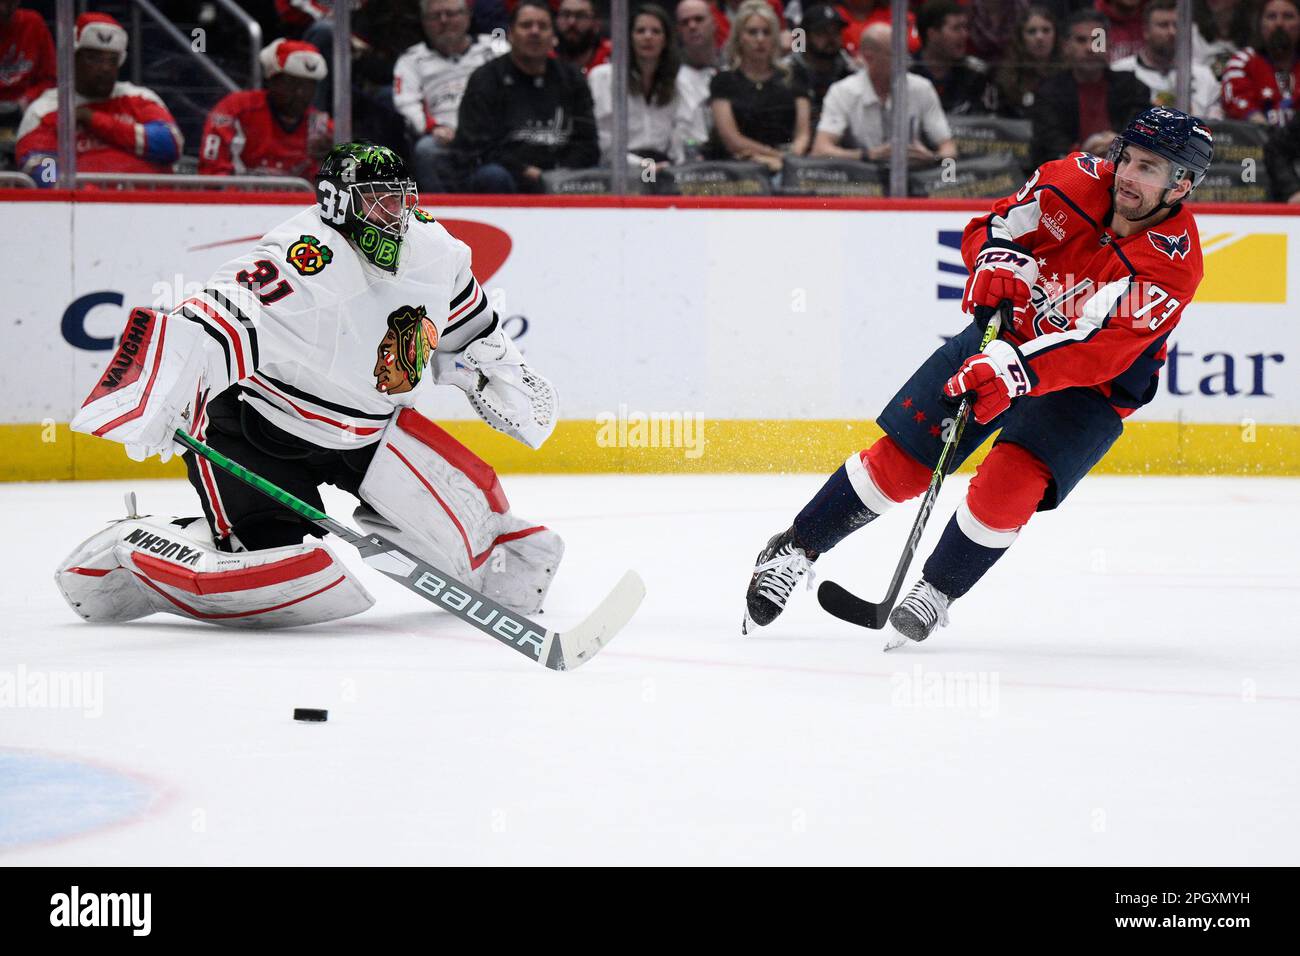 https://c8.alamy.com/comp/2PGXMYH/washington-capitals-left-wing-conor-sheary-73-scores-a-goal-past-chicago-blackhawks-goaltender-anton-khudobin-31-during-the-first-period-of-an-nhl-hockey-game-thursday-march-23-2023-in-washington-ap-photonick-wass-2PGXMYH.jpg